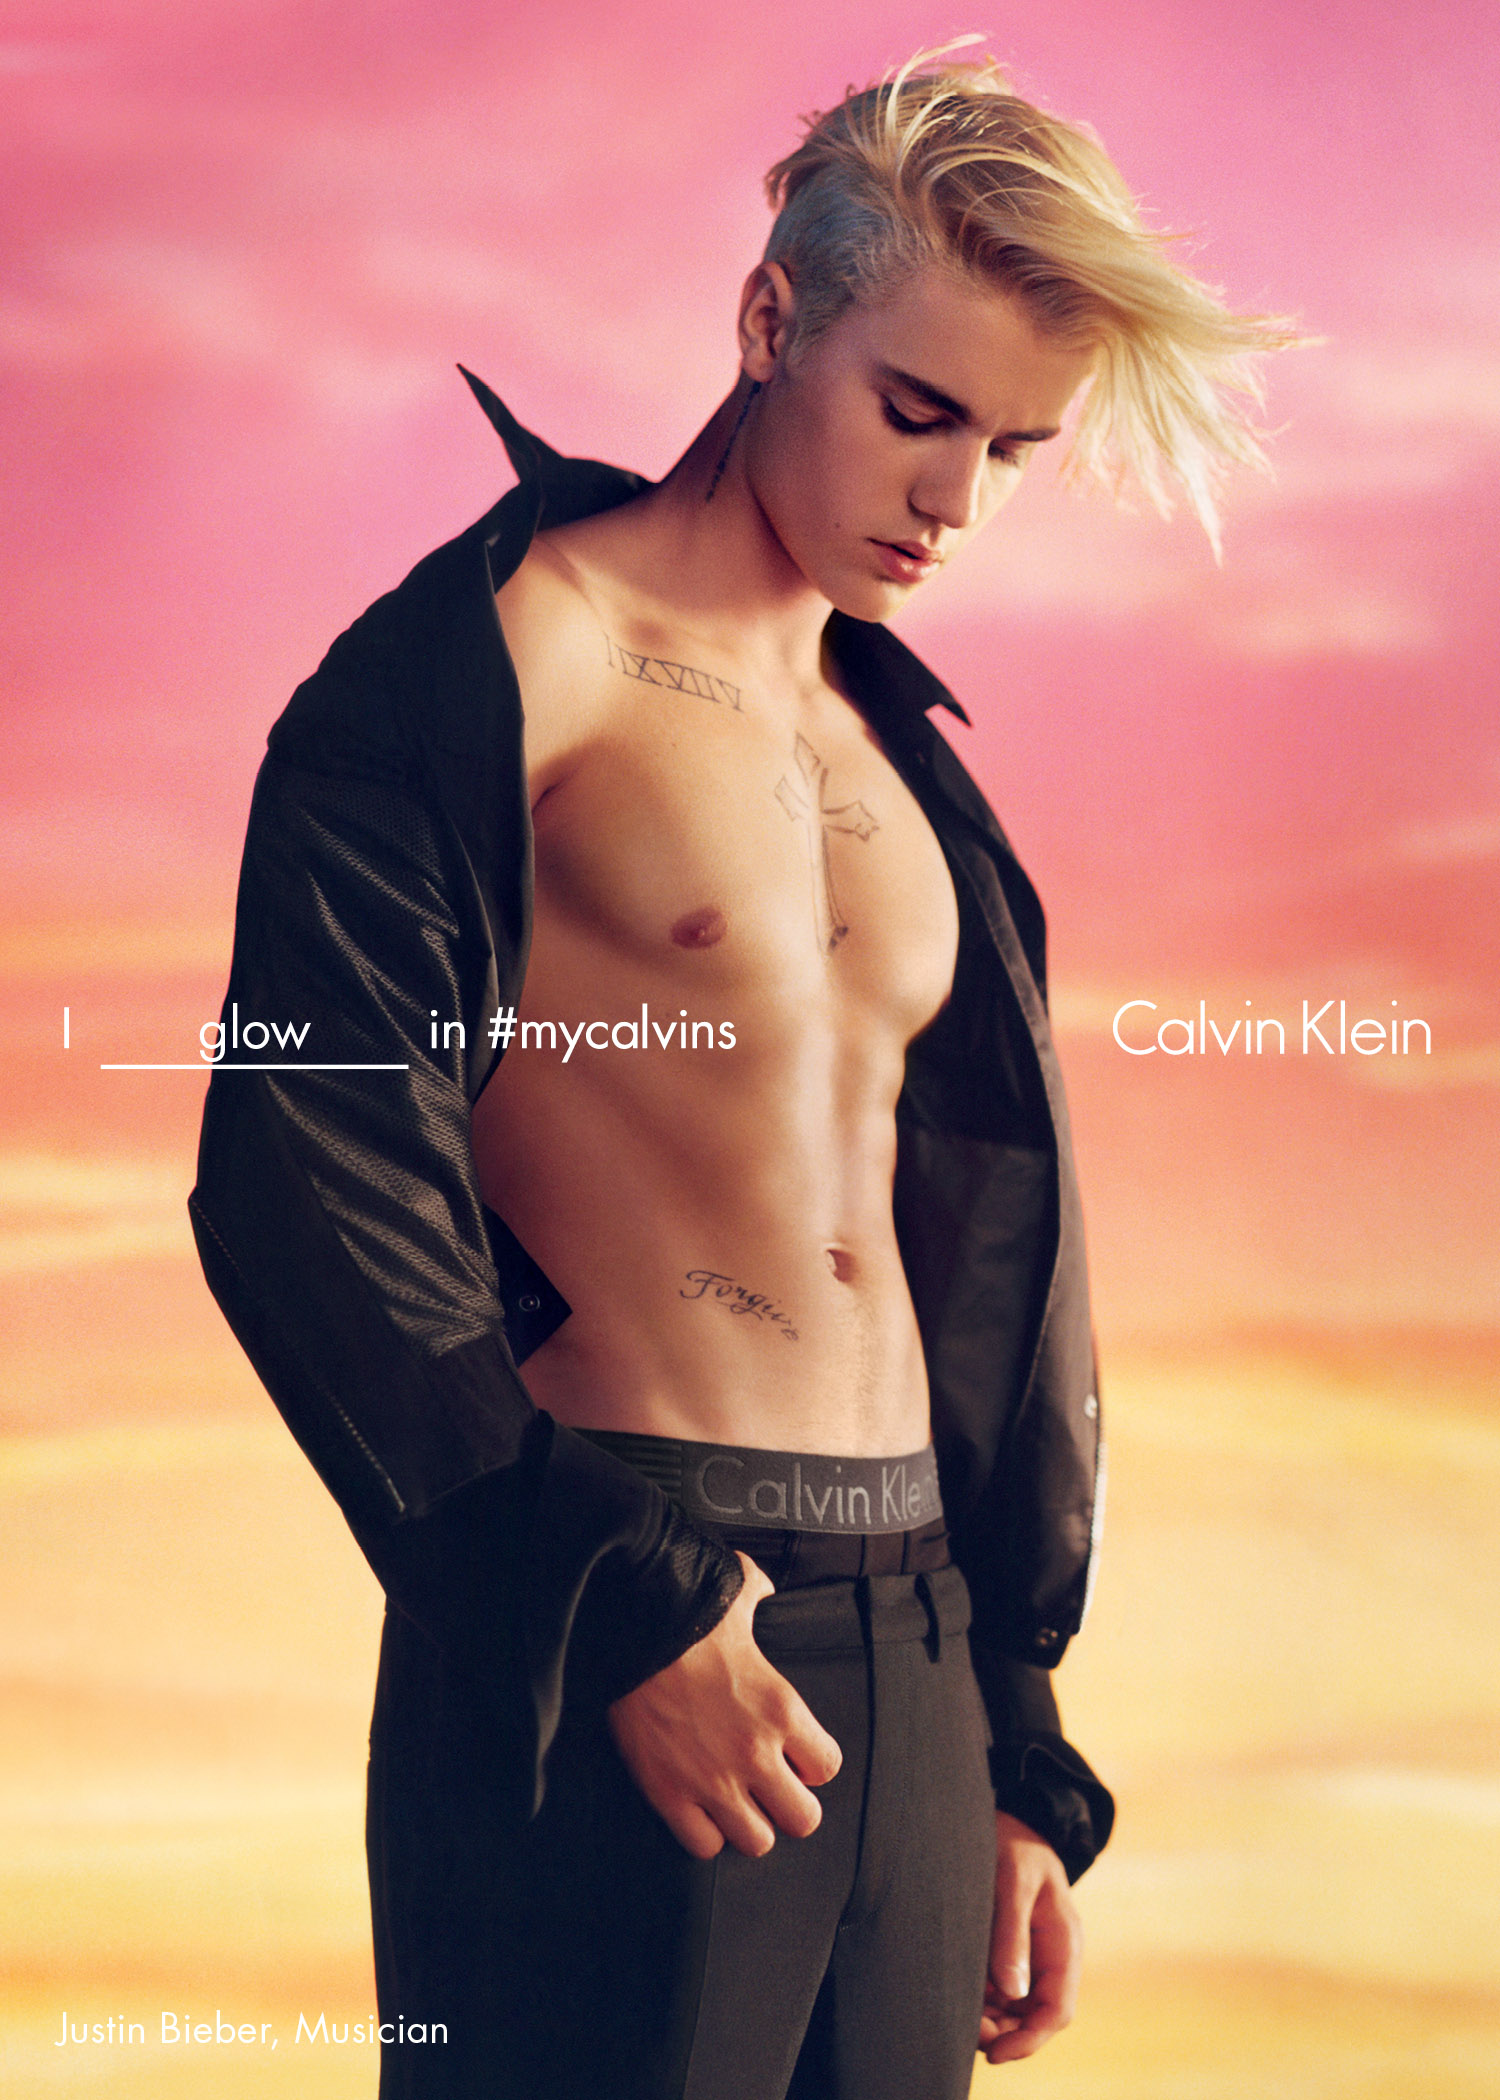 Justin Bieber's underpants are out of fashion - 9Style1500 x 2100